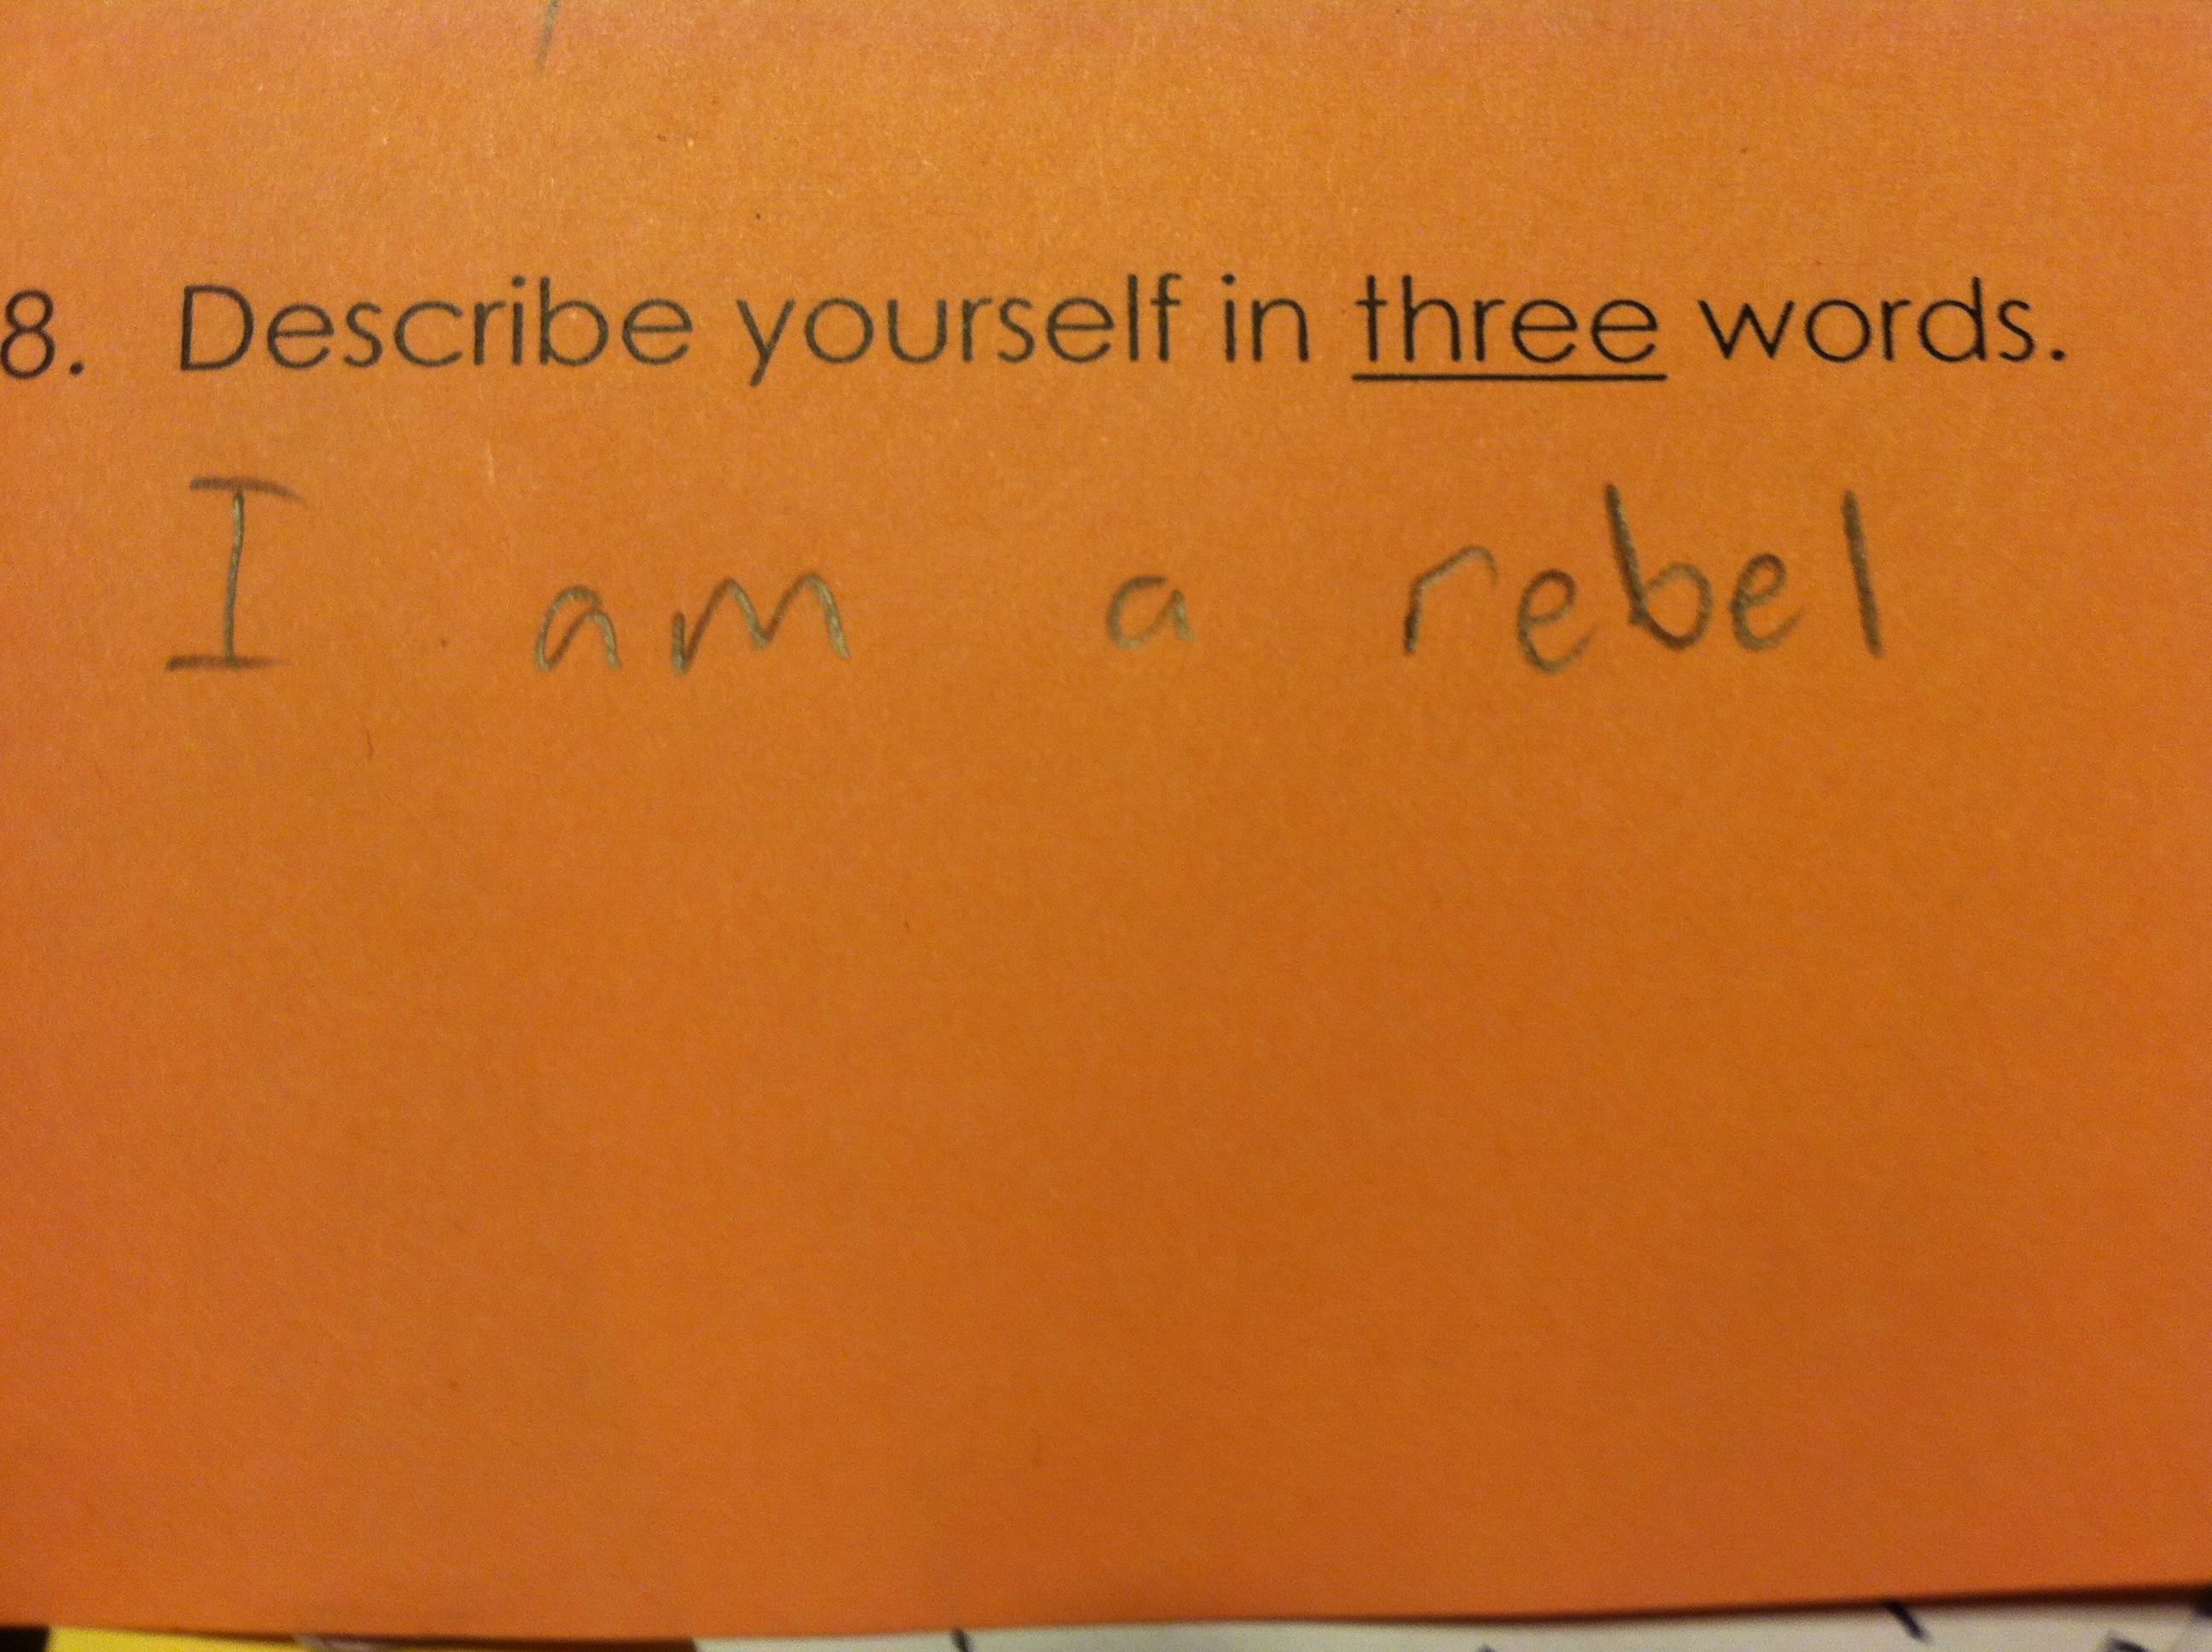 funny answers that kids put on tests - 8. Describe yourself in three words. I am a rebel